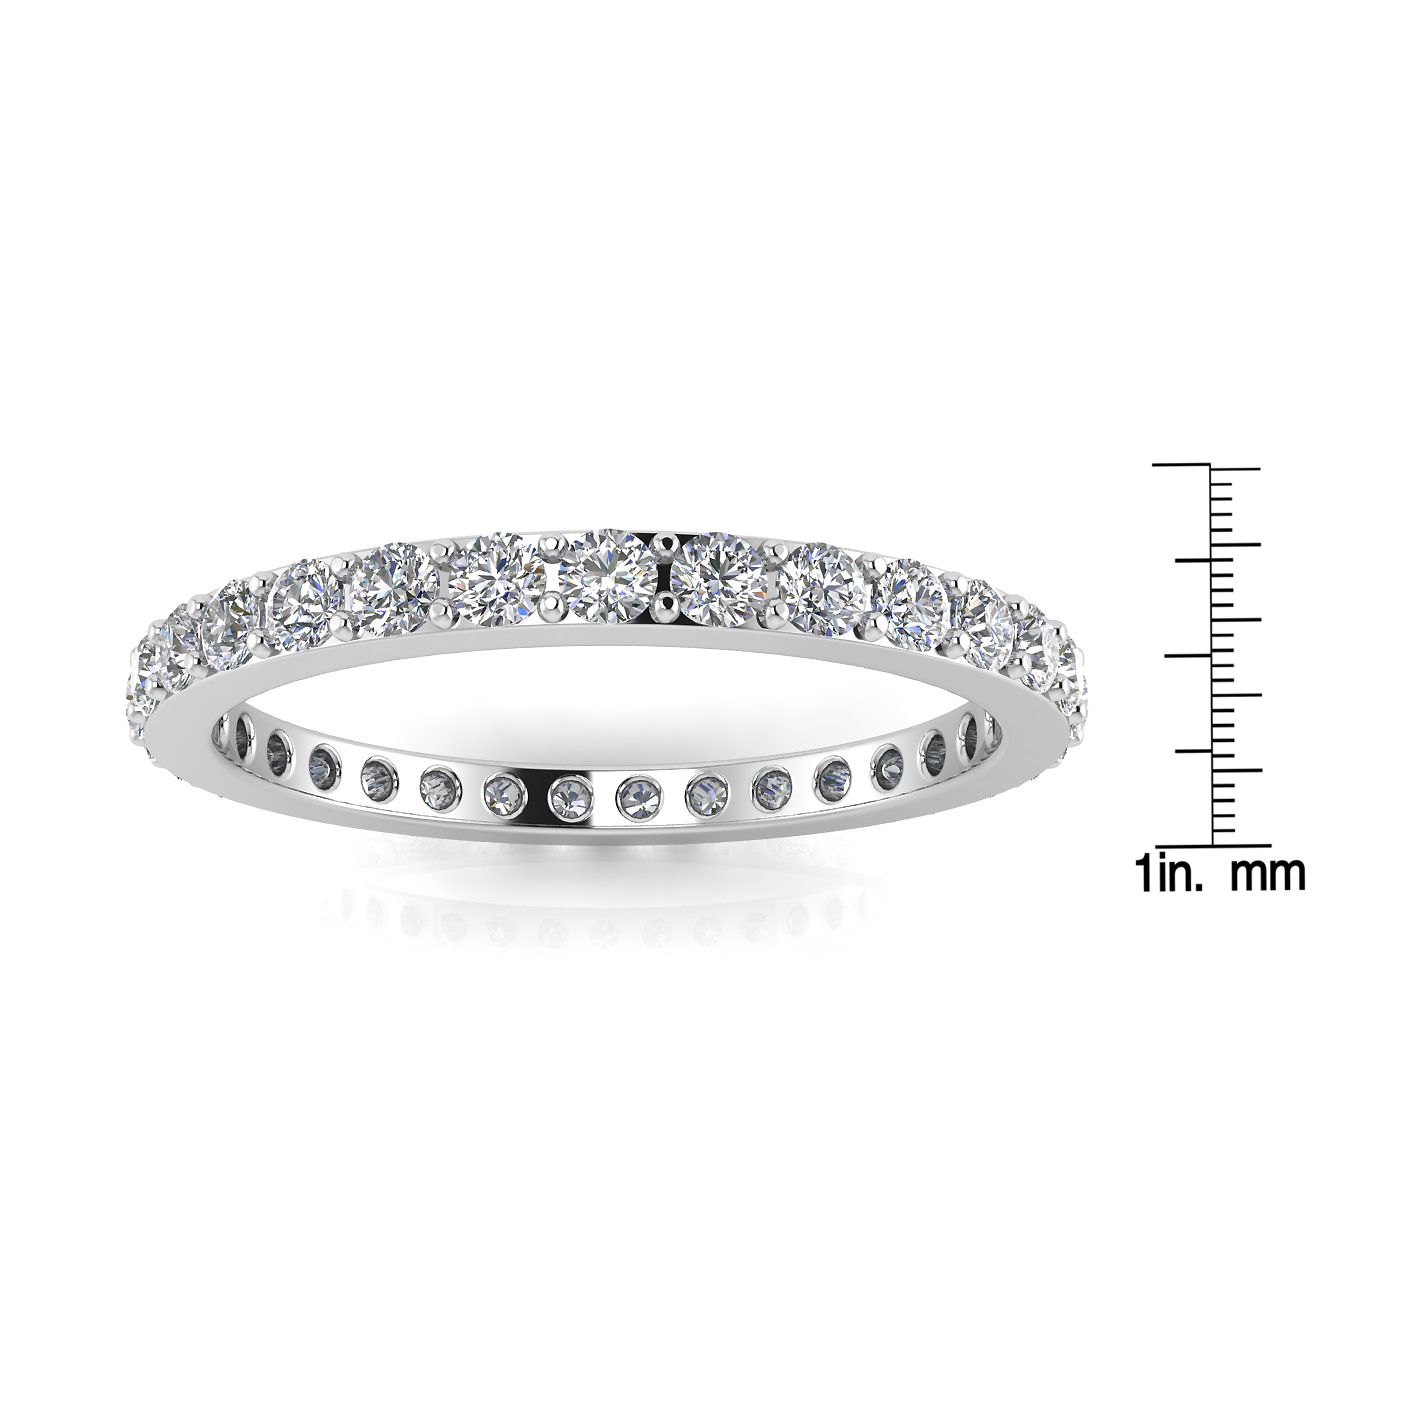 Round Brilliant Cut Diamond Pave Set Eternity Ring In 18k White Gold  (0.46ct. Tw.) Ring Size 6